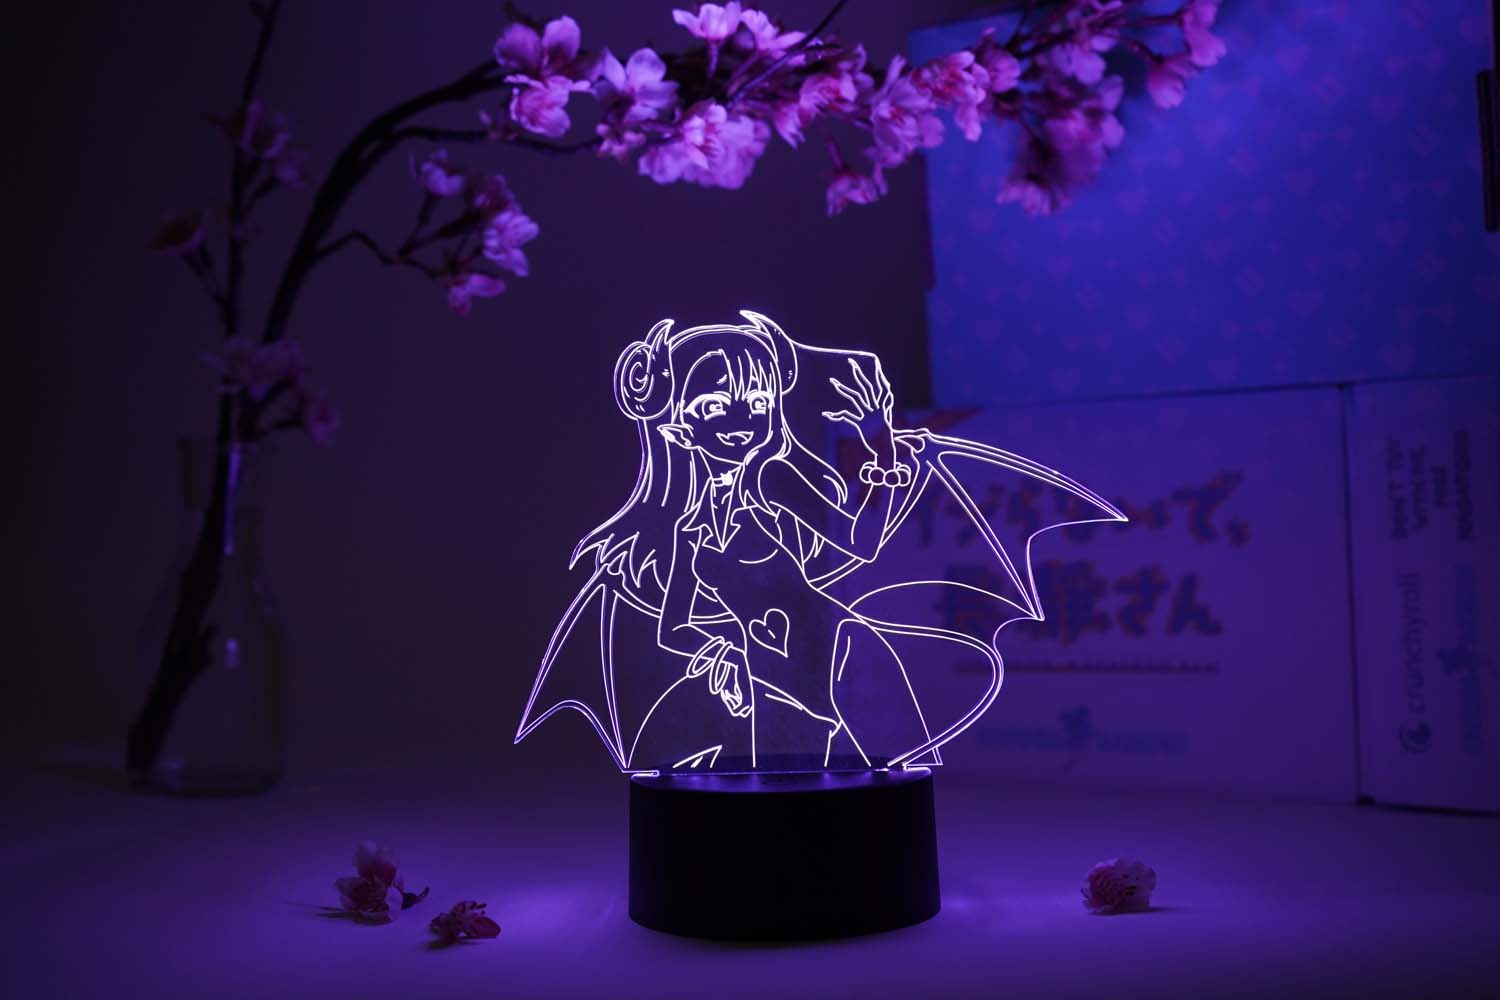 Buy StarLaser Naturoitachi526 Anime Led Night Lamp 16 Color Changing Light  With Remote Control Desk Table LampAcrylic Multi Pack of 1 Online at  Low Prices in India  Amazonin